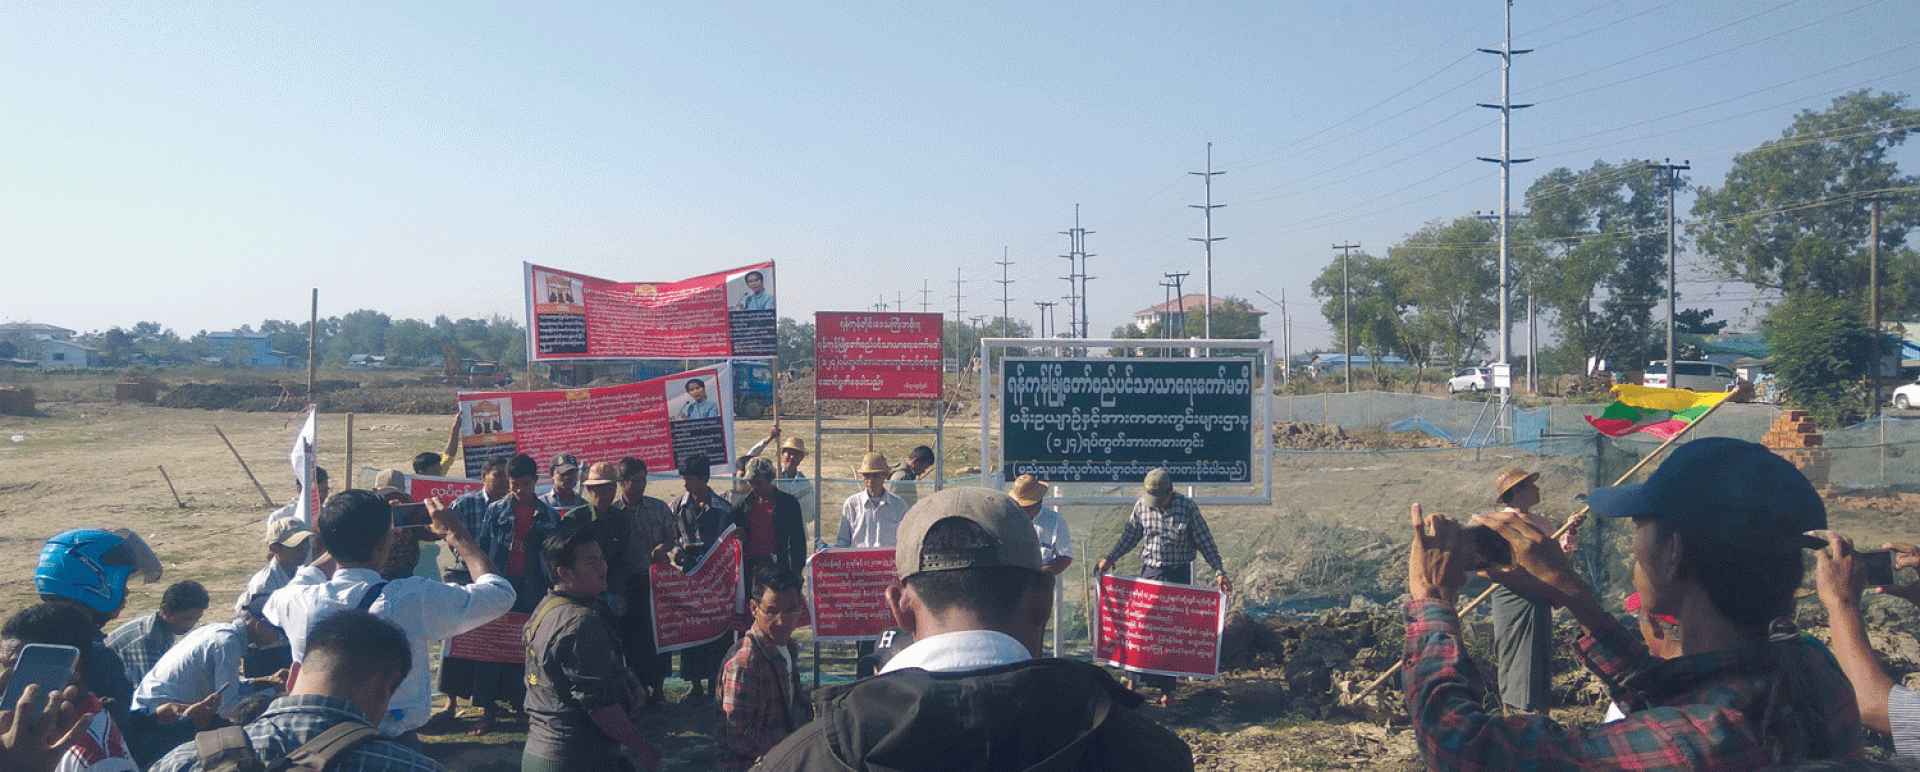 Farmers staging a protest against the grabbed land